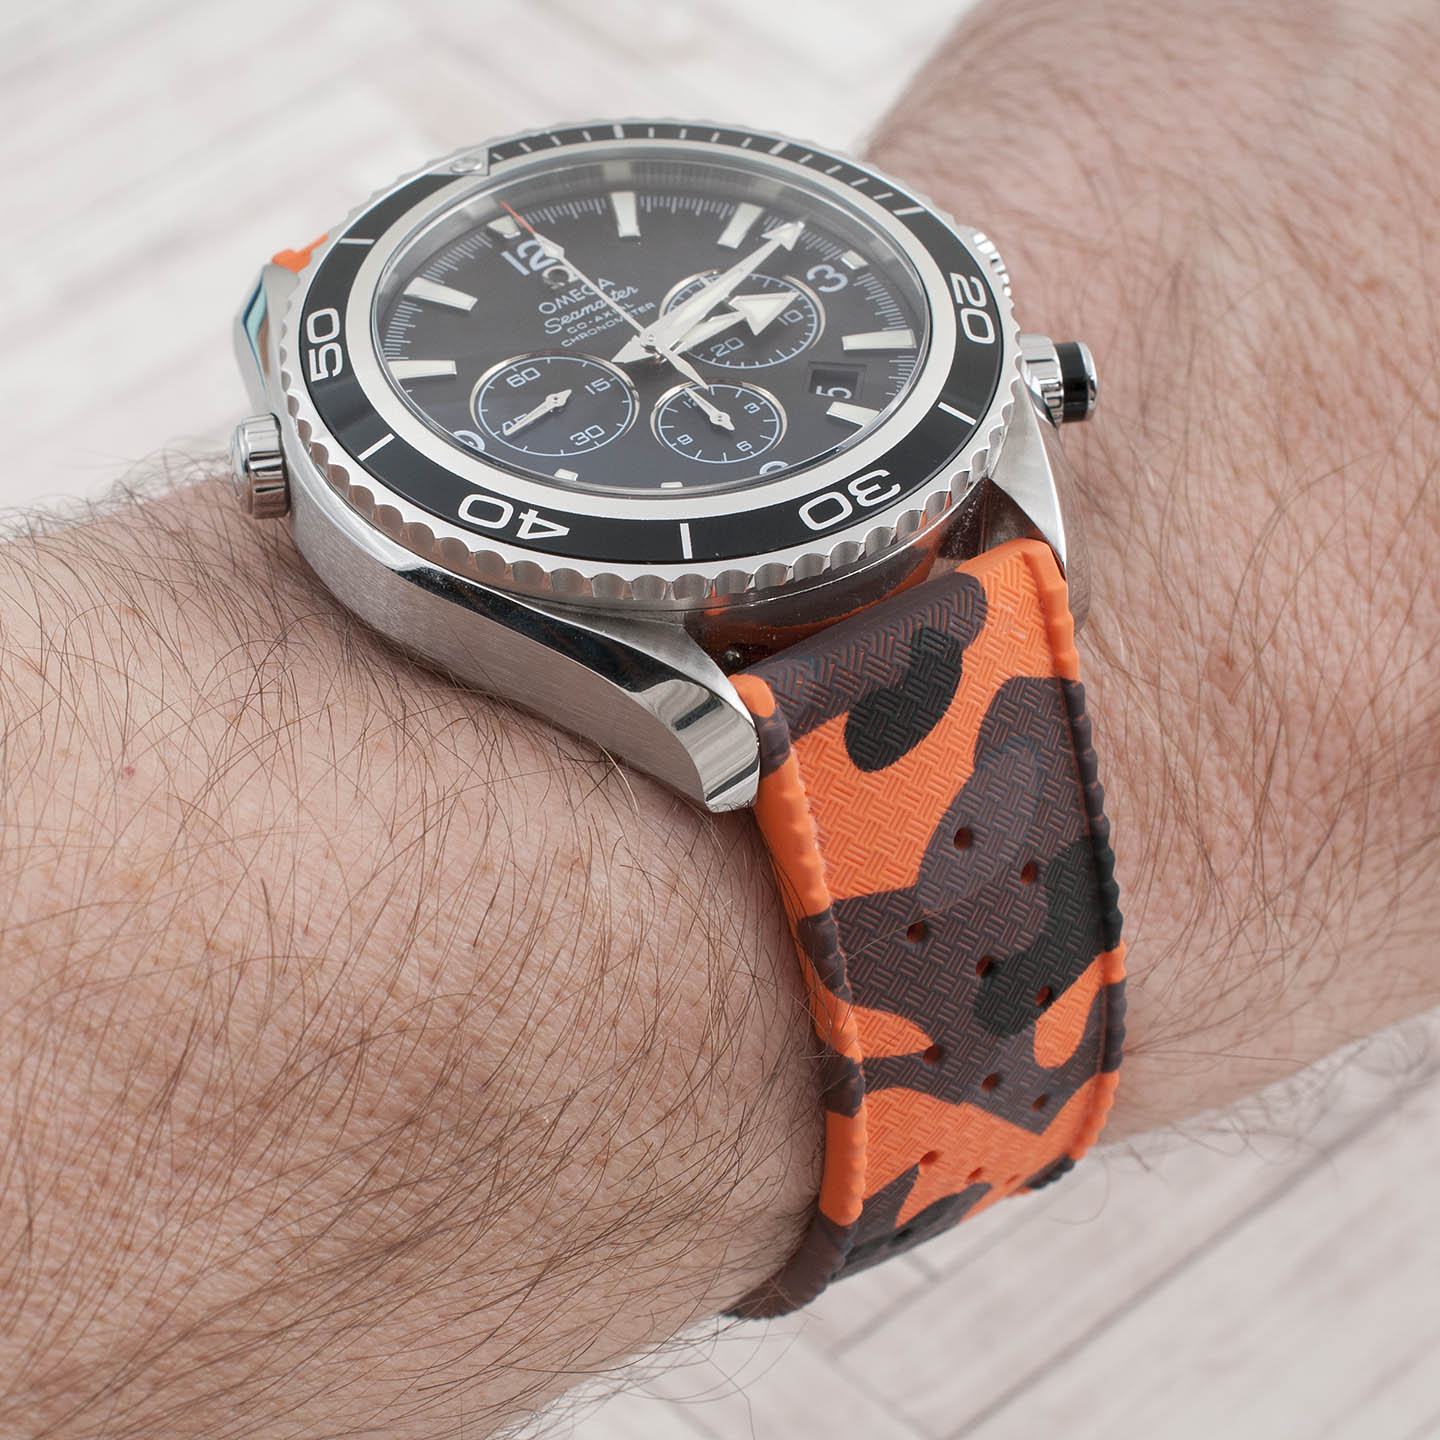 Tropical retro vintage replacement watch strap band FKM rubber tropic 19mm 20mm 21mm 22mm orange camo camouflage omega planet ocean chronograph 2210.50,00